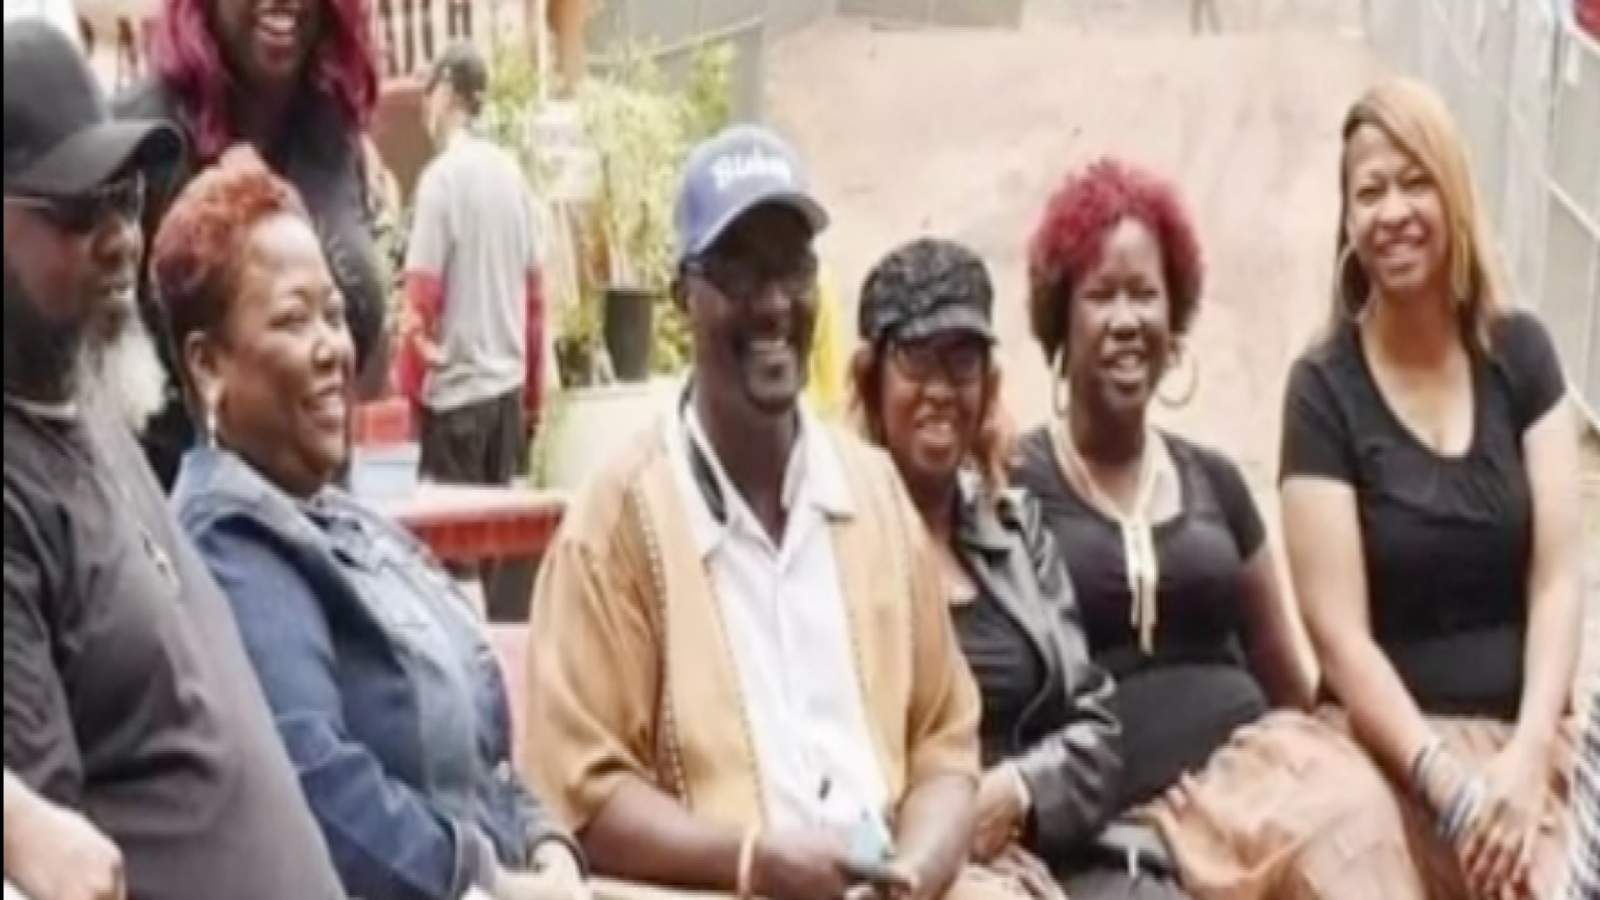 Family of gospel singers recovers from COVD-19, continues to spread hope through virtual concert